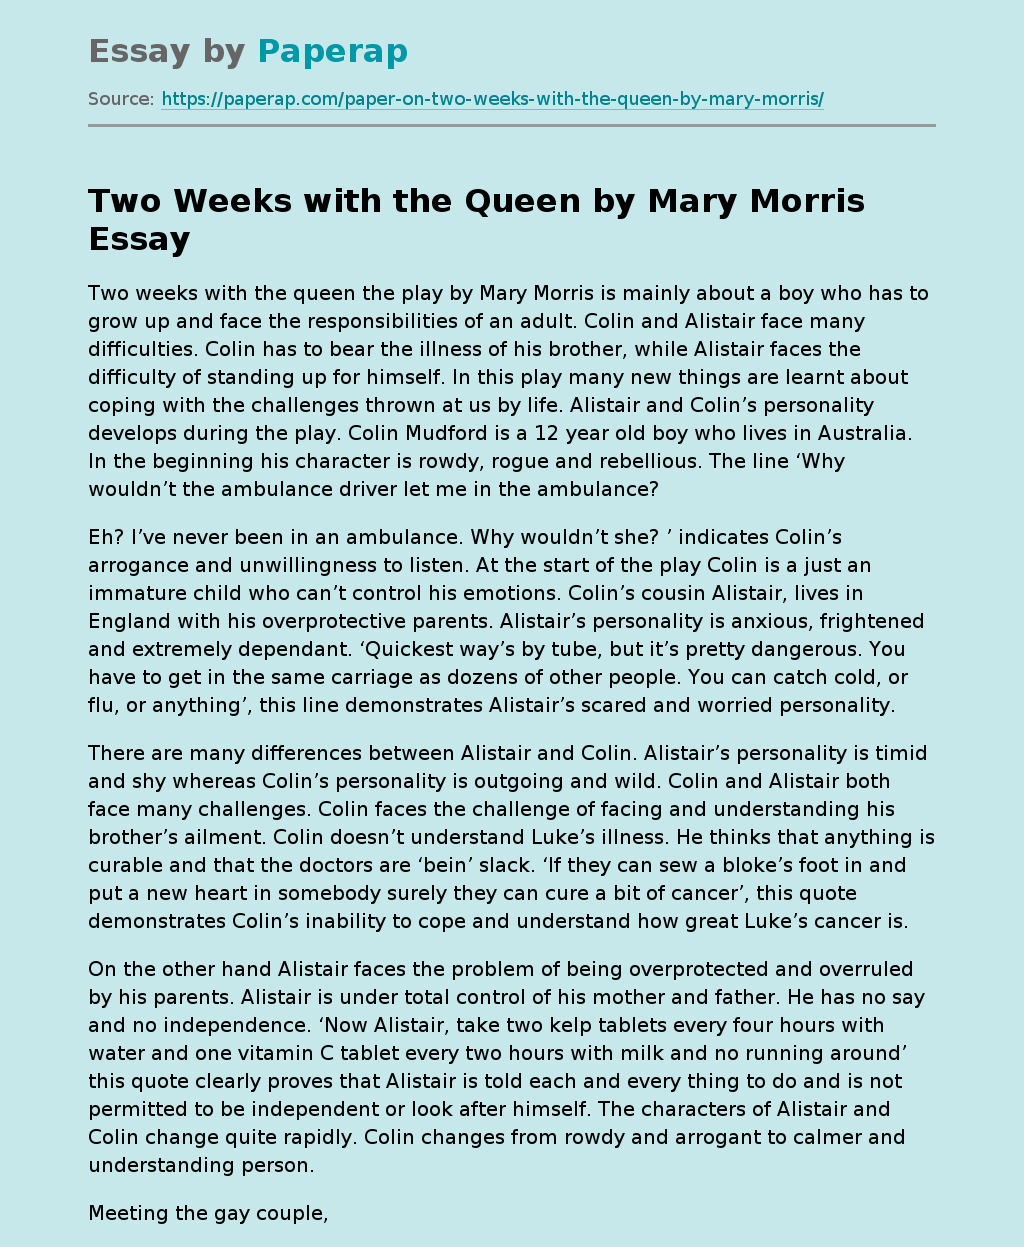 Two Weeks with the Queen by Mary Morris